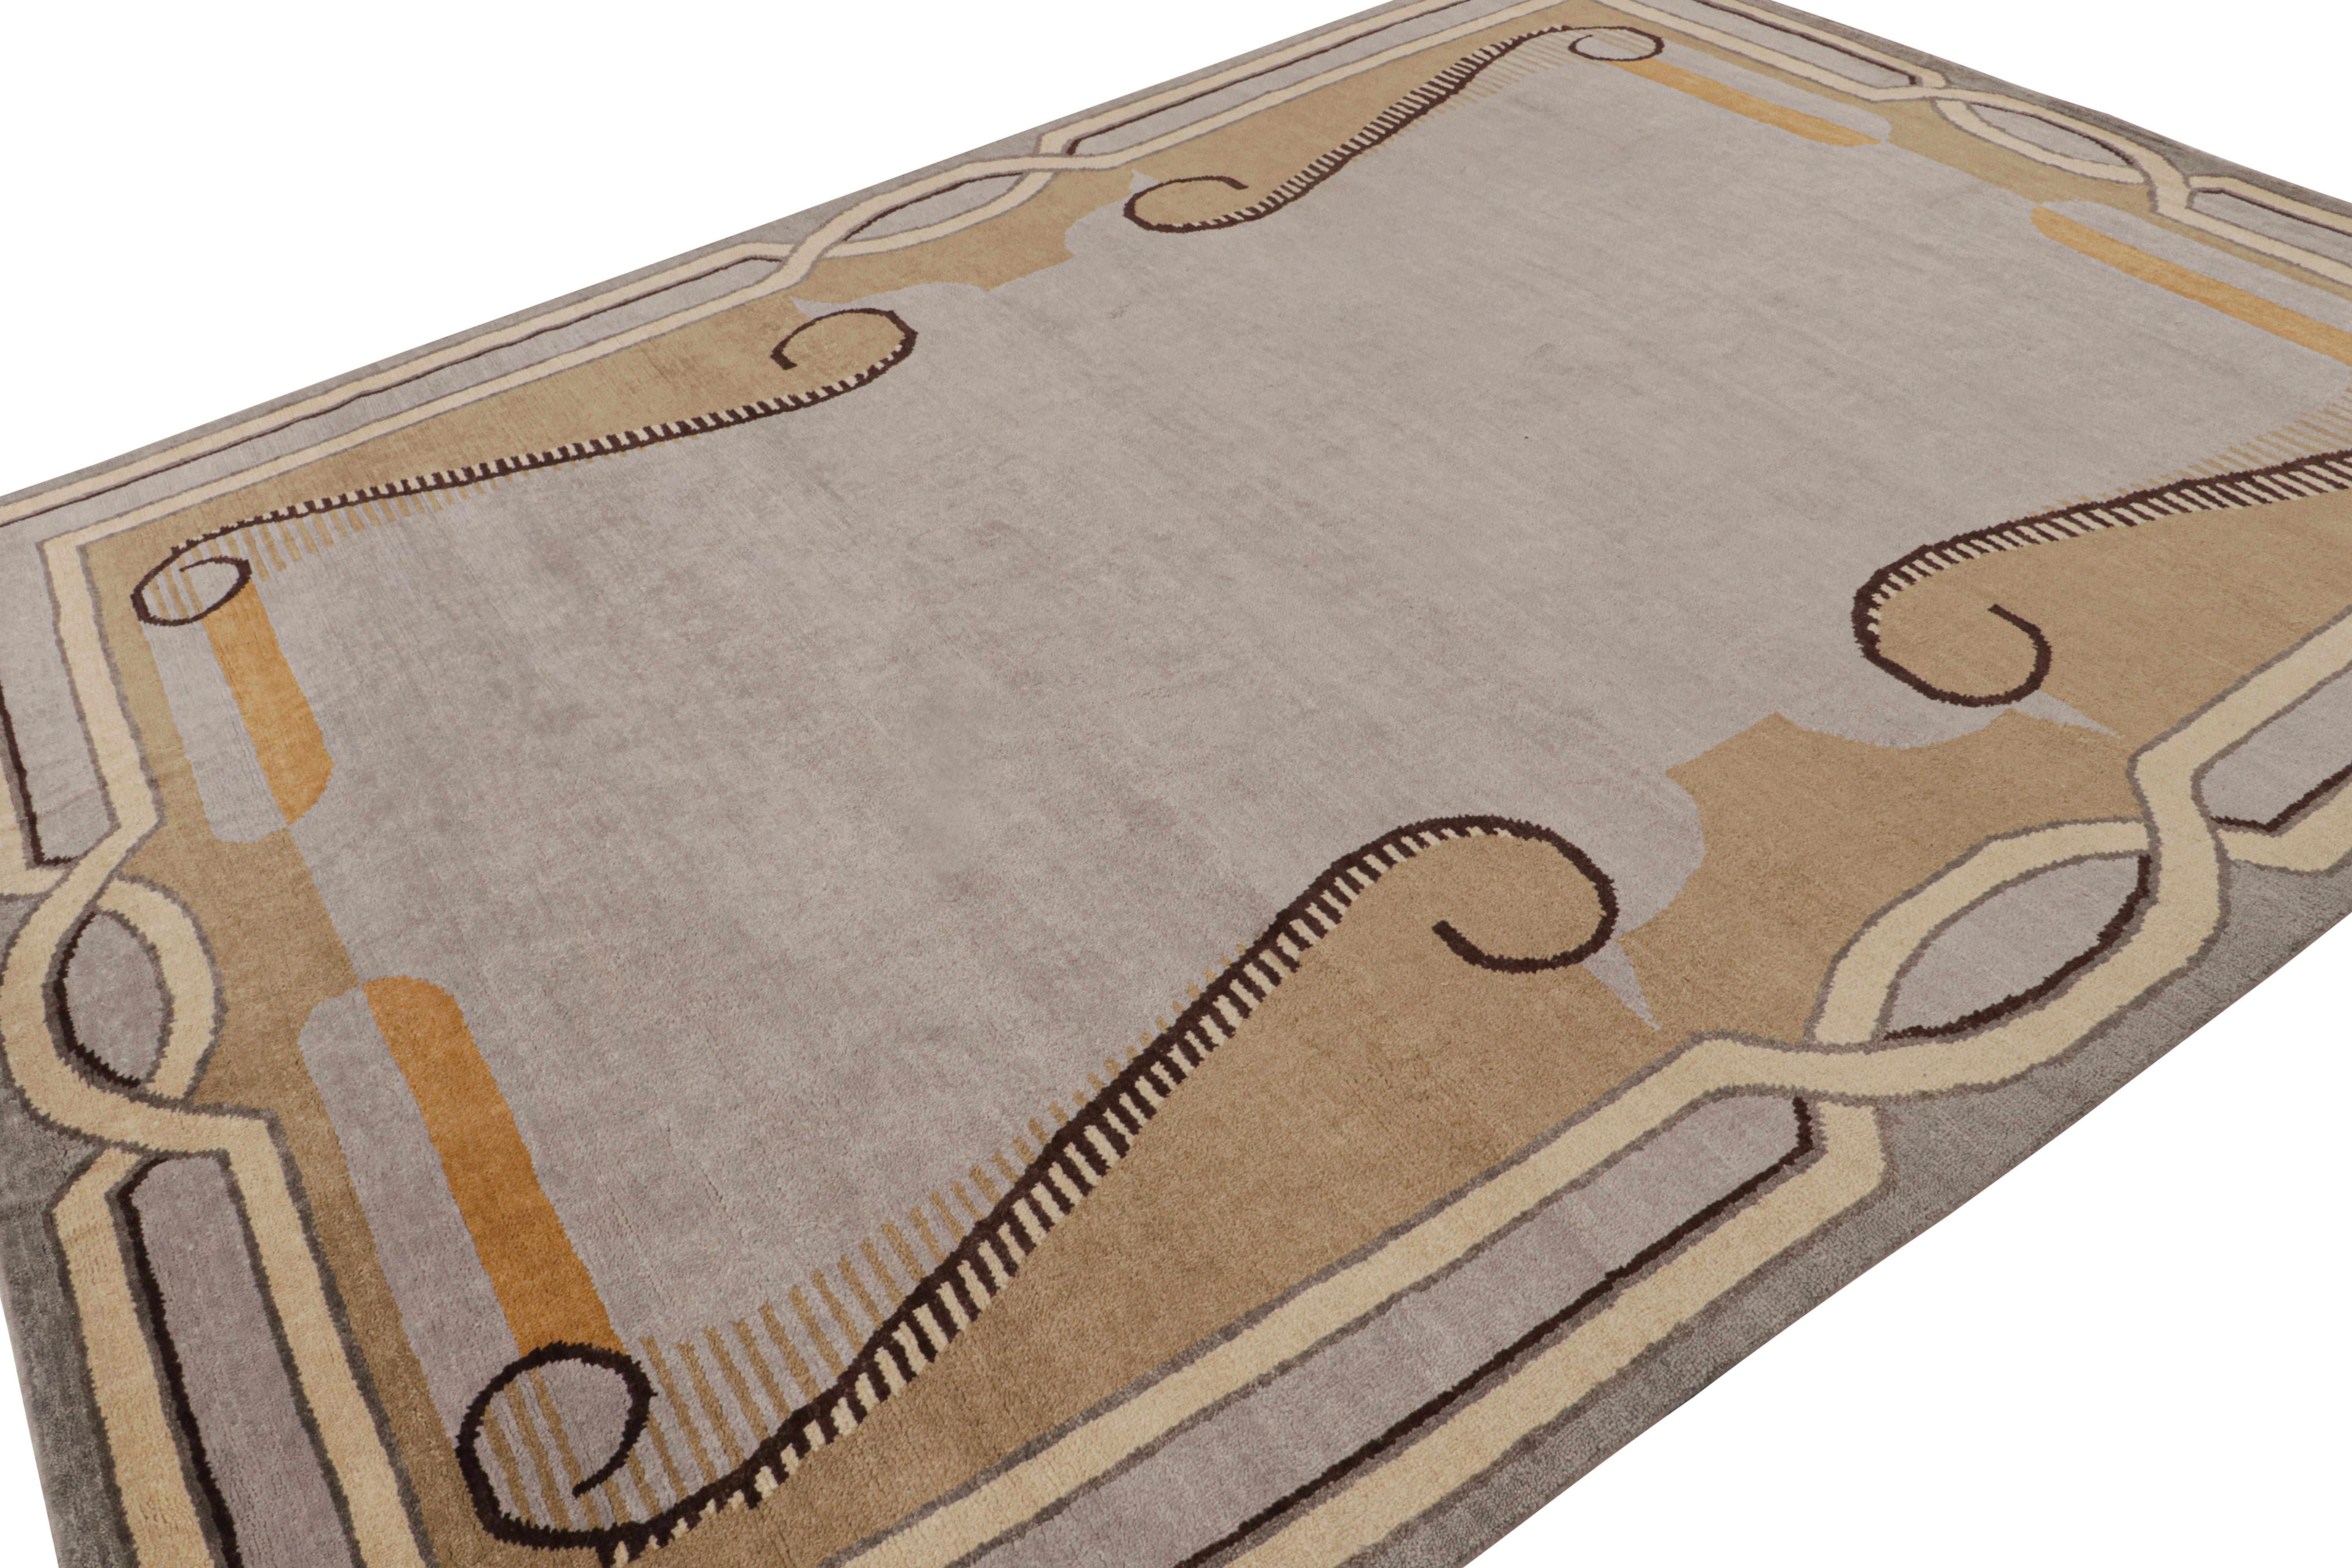 Hand-knotted in wool, this 9x12 modern rug by Rug & Kilim is a new addition to their French Art Deco rug line. Its design enjoys a gray open field with the most subtle hint of lavender tones underscoring architectural European-style borders in beige